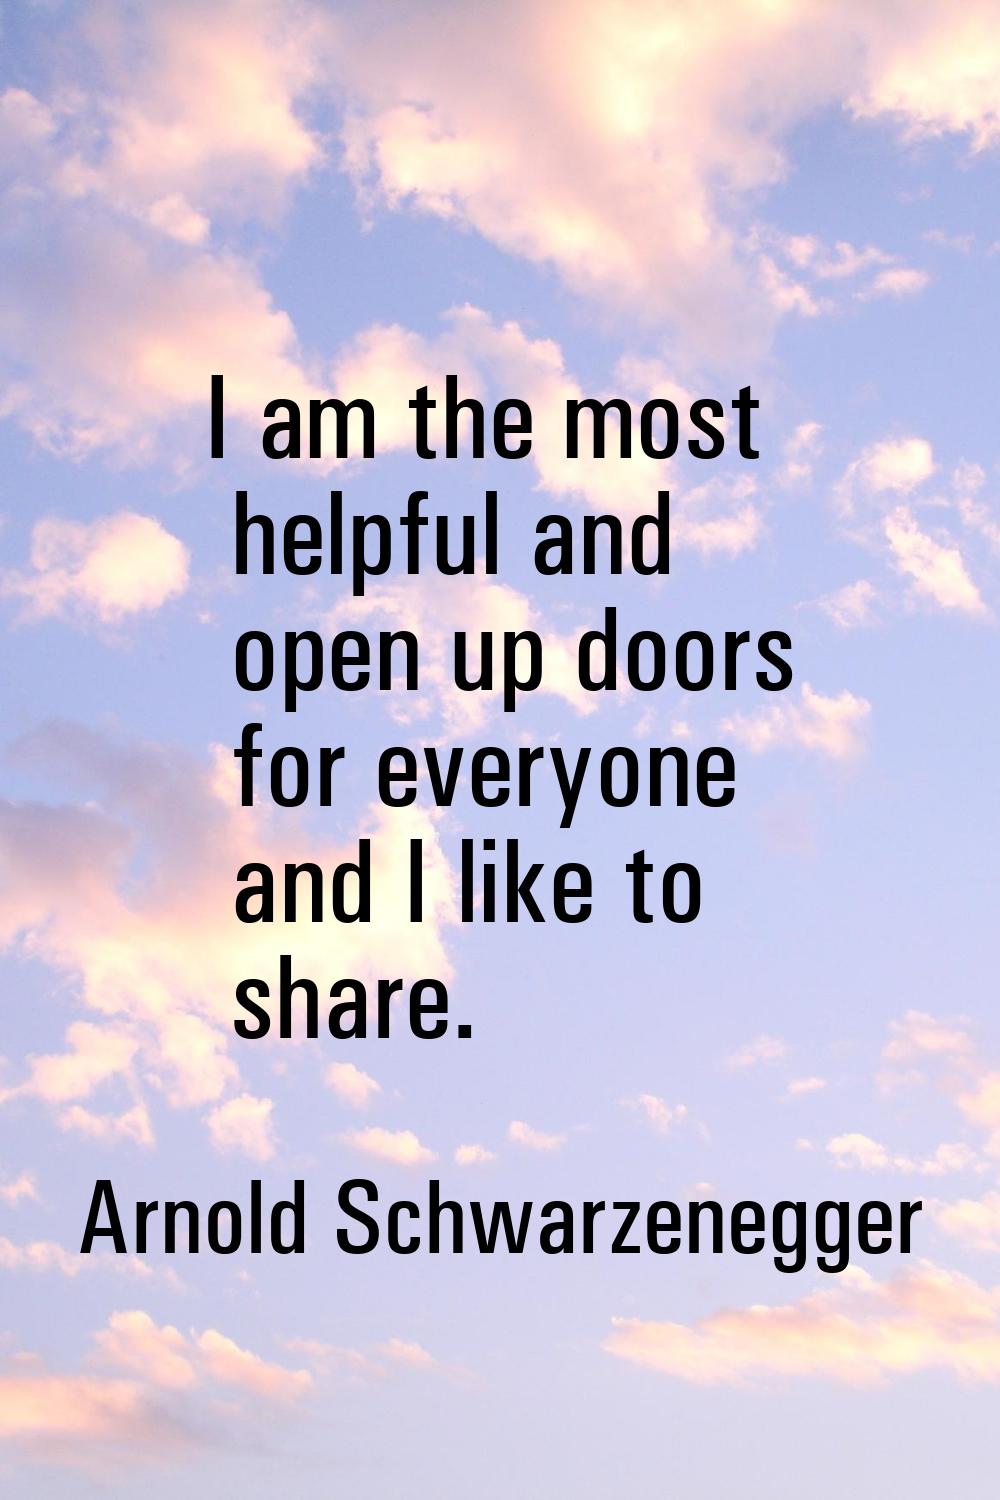 I am the most helpful and open up doors for everyone and I like to share.